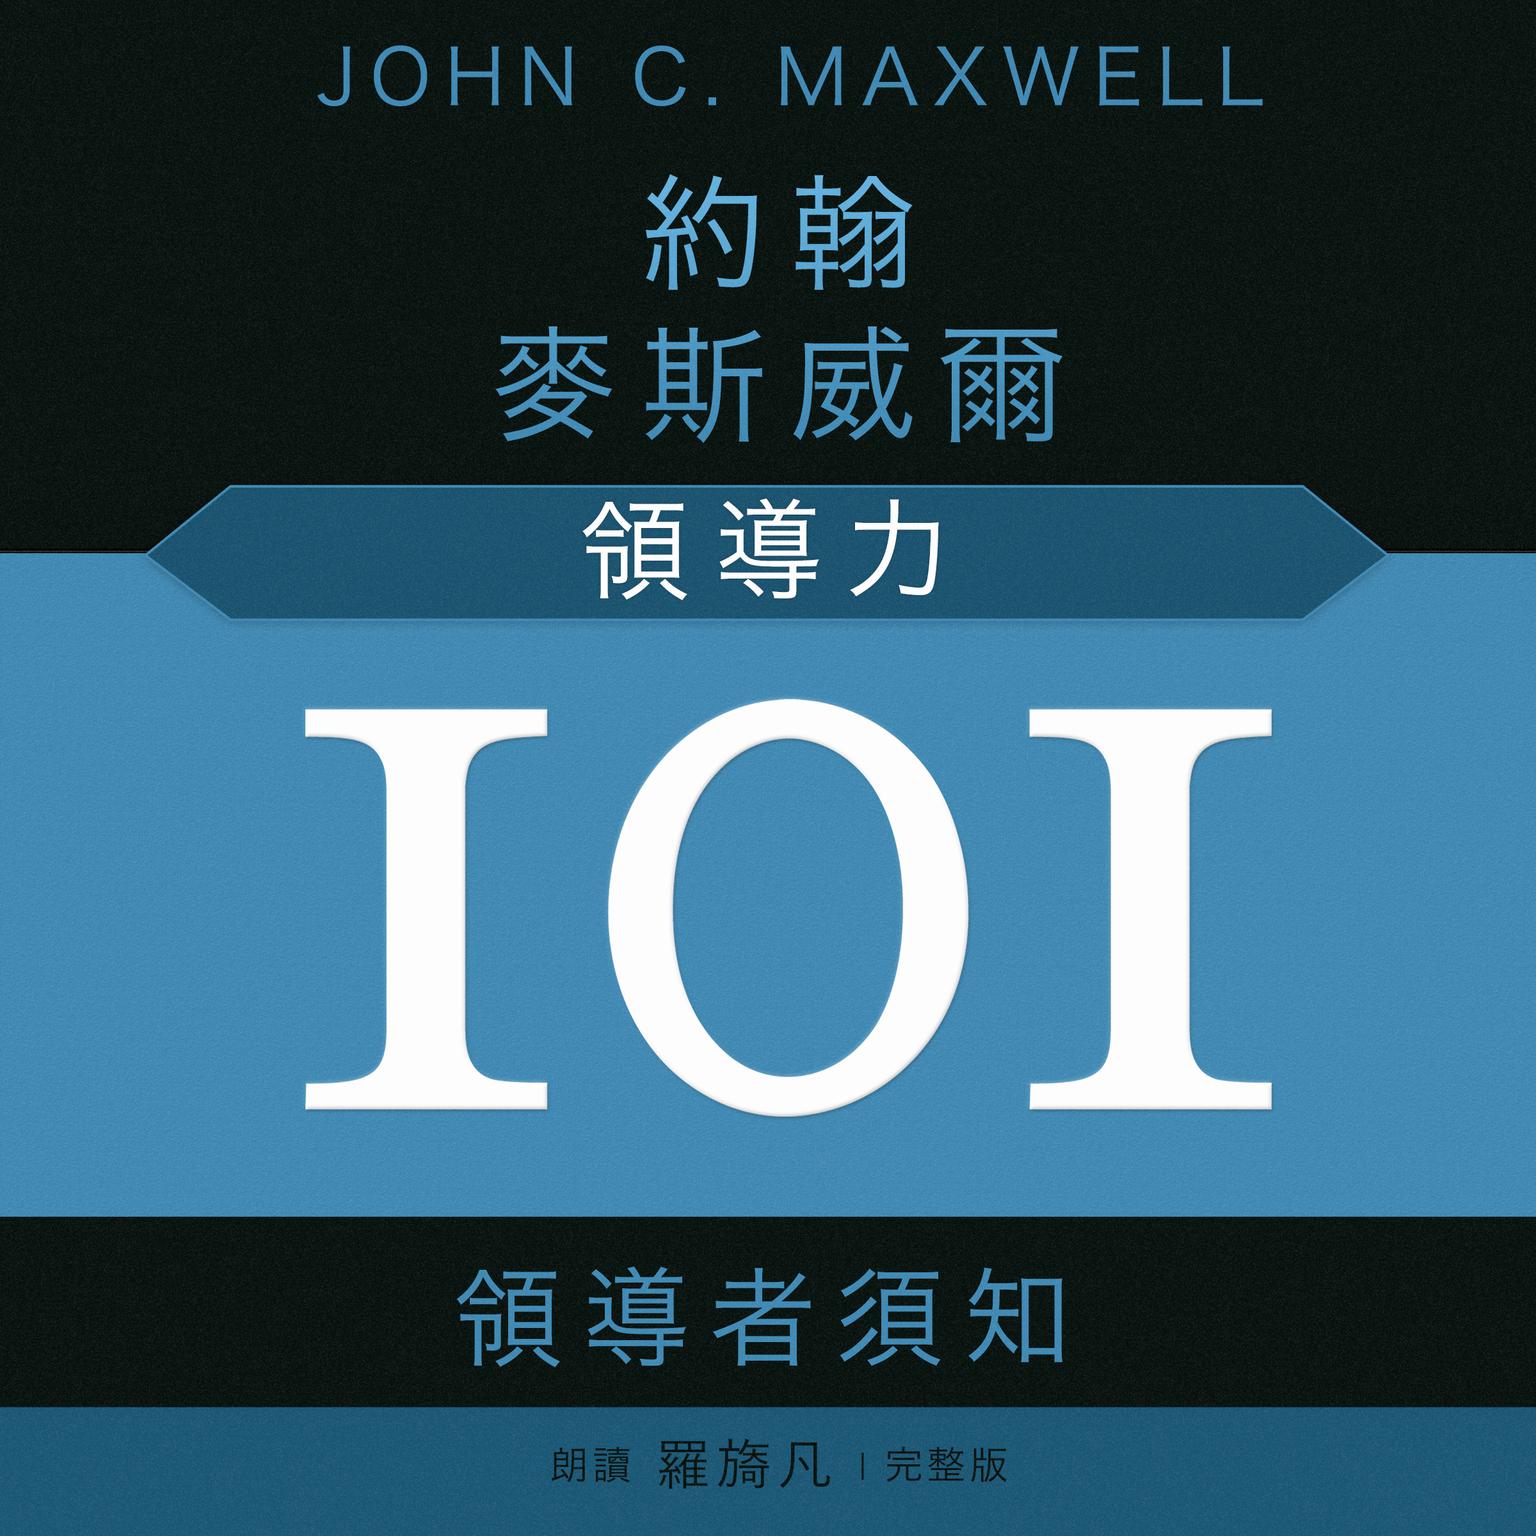 Leadership 101 (Mandarin): What Every Leader Needs to Know Audiobook, by John C. Maxwell